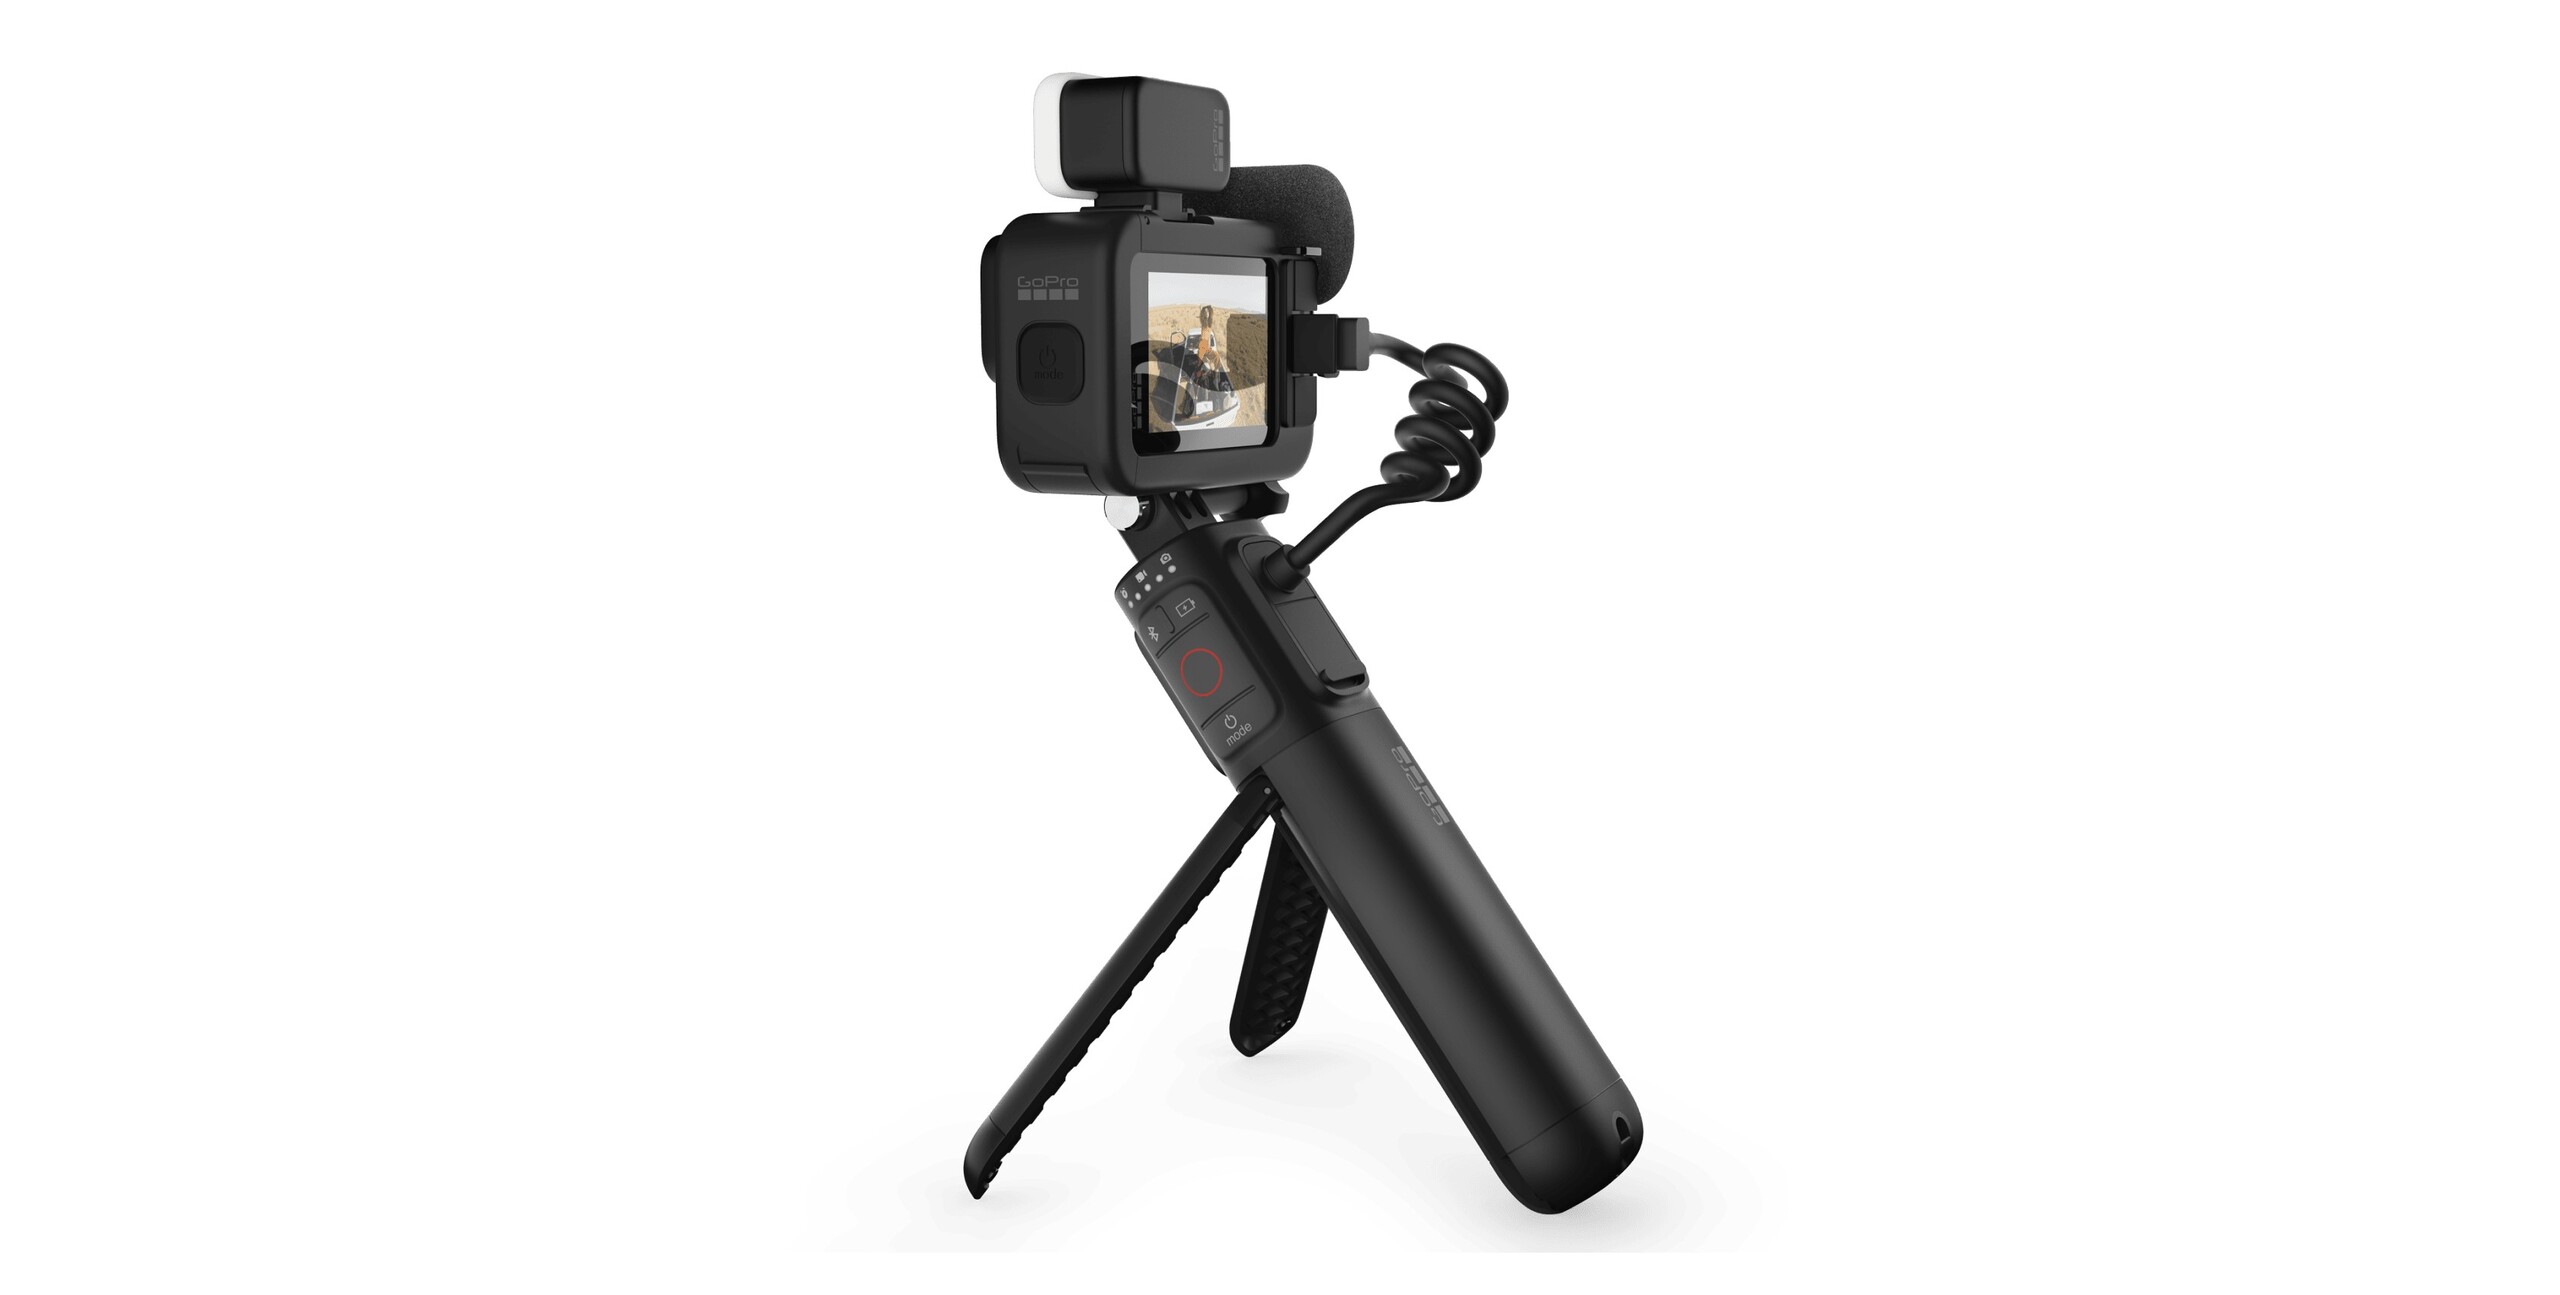 GoPro launches the Volta, a new 2-in-1 battery pack/camera grip